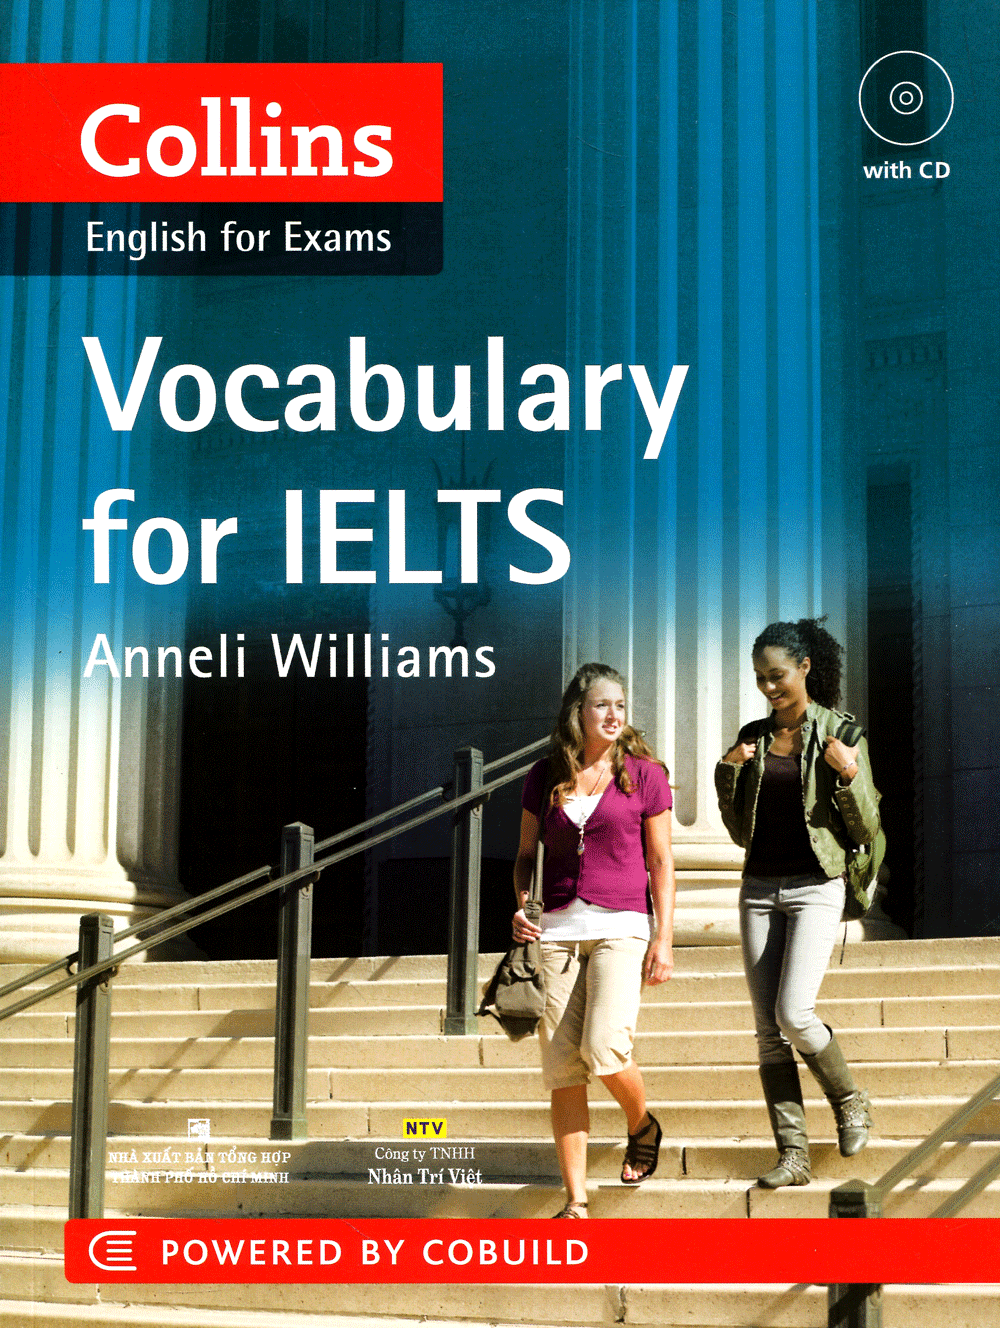  Collins English For Exams - Vocabulary For IELTS 